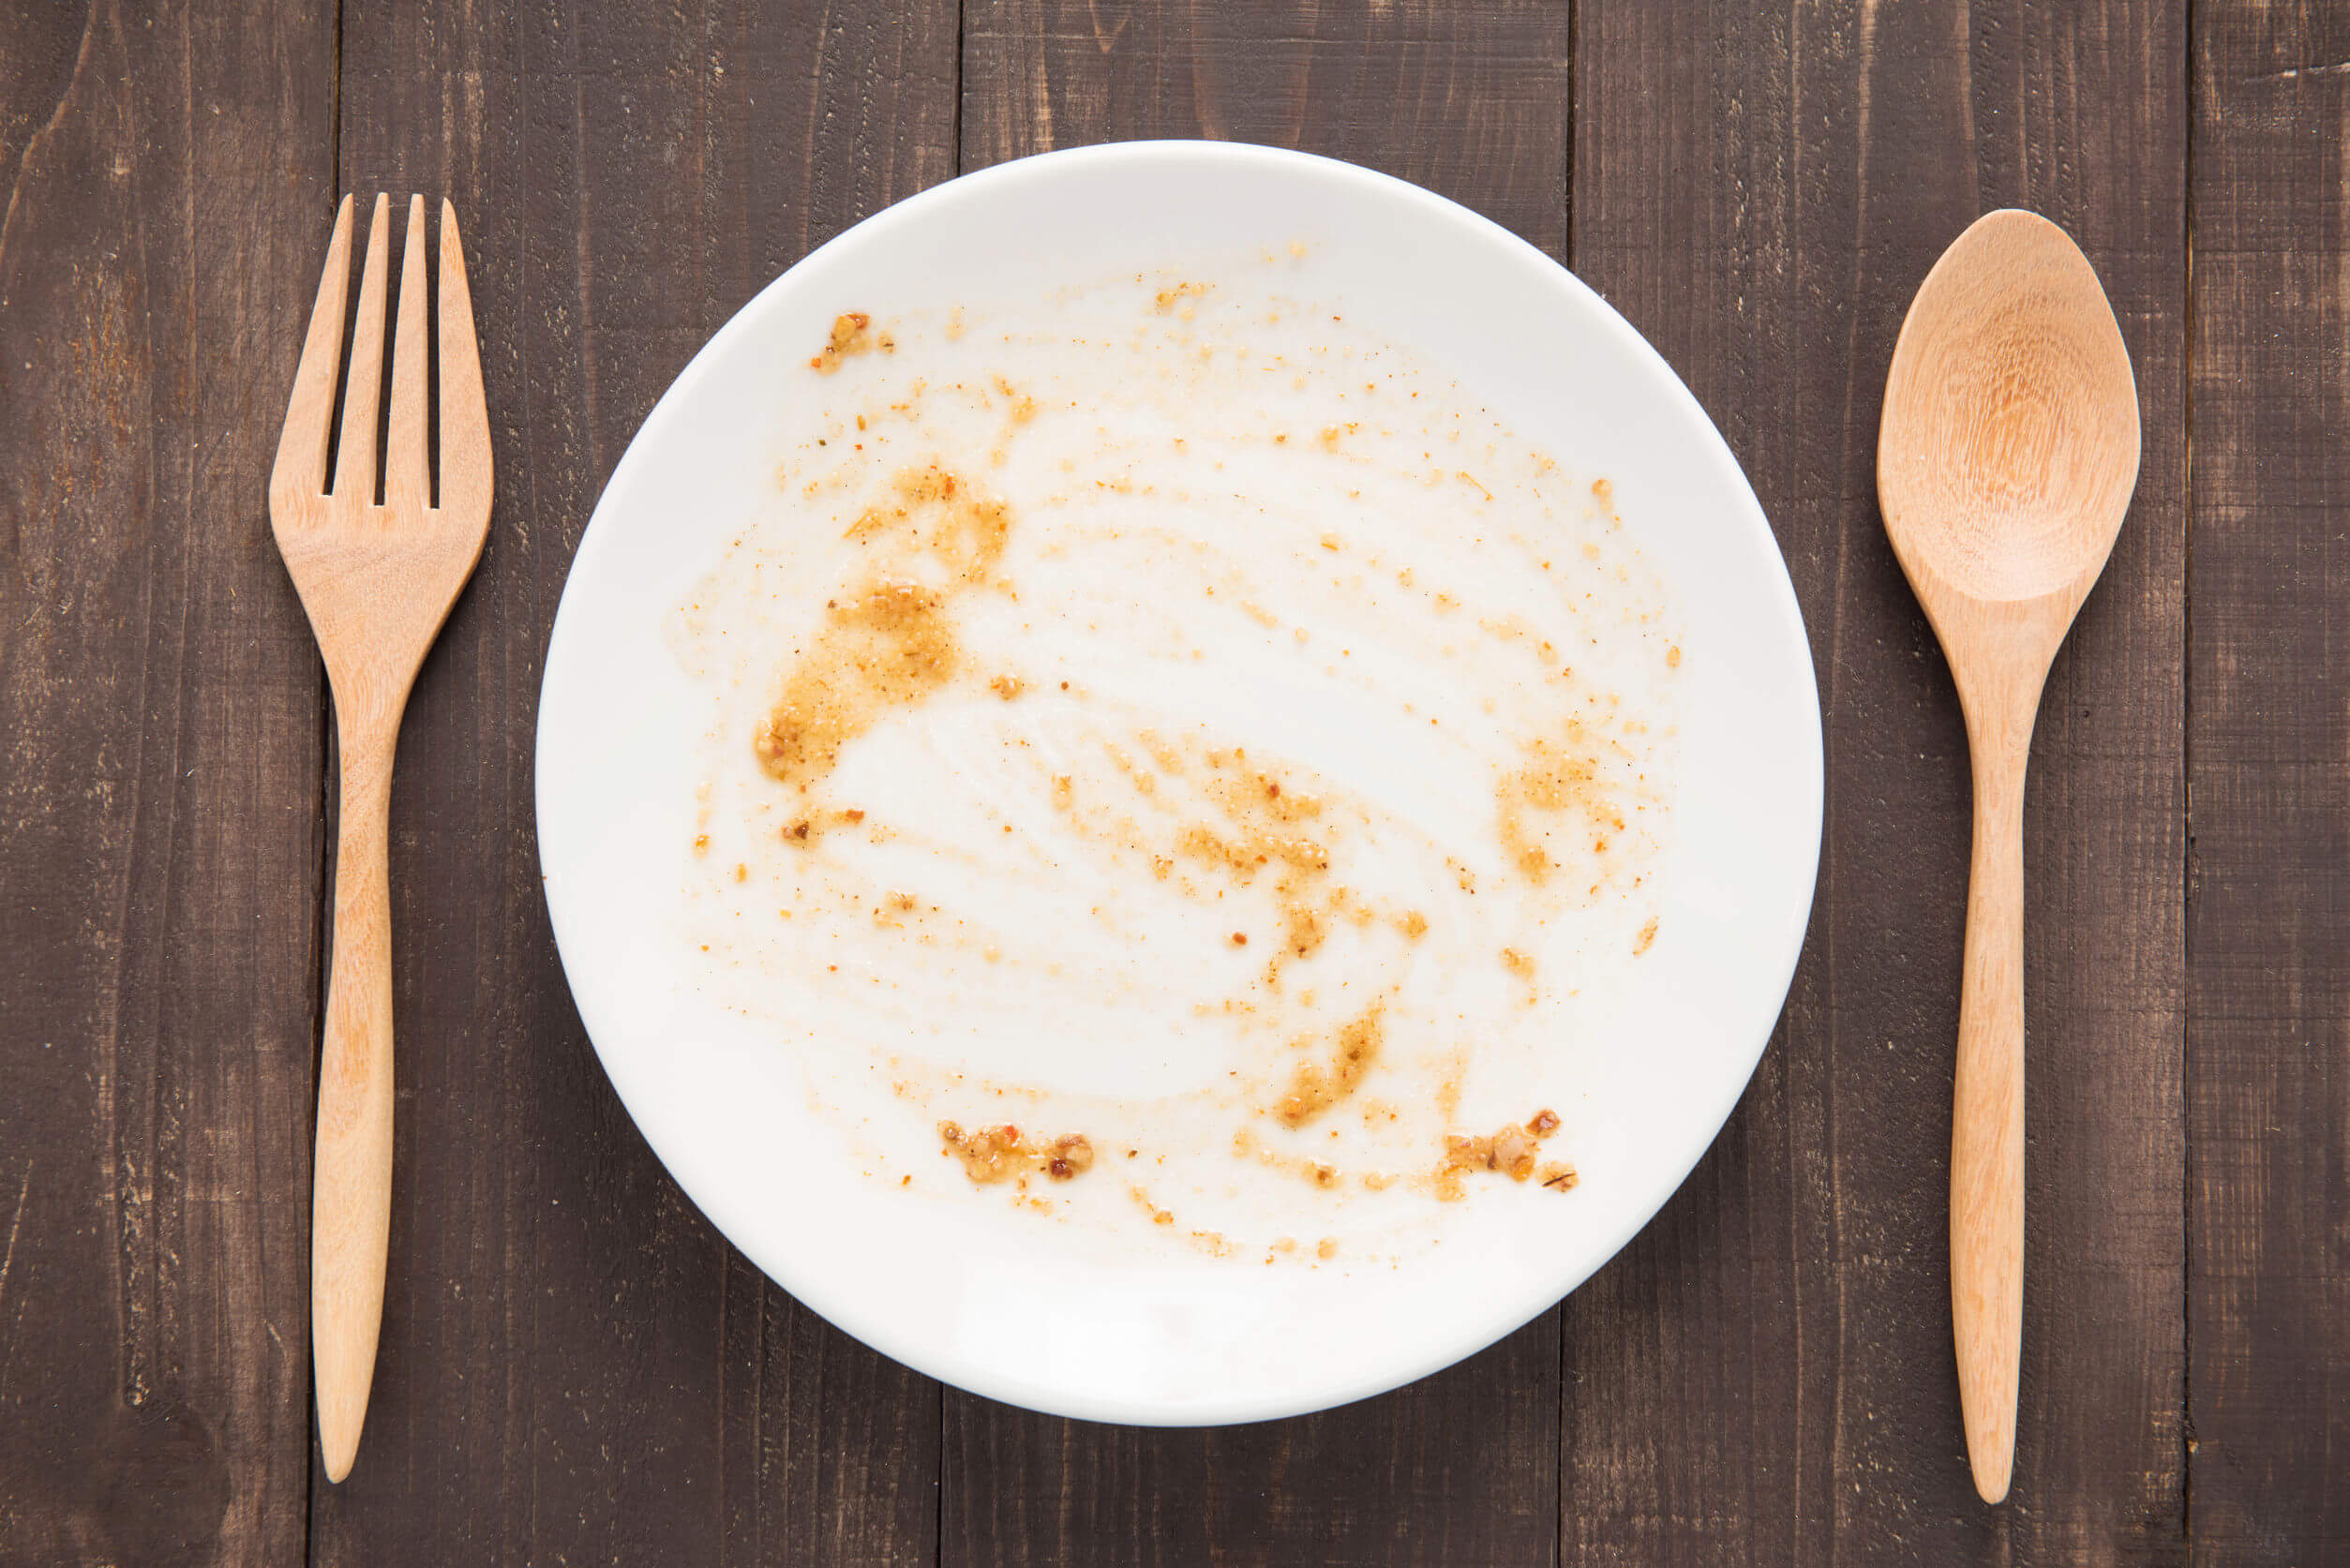 A plate that's been emptied of food.